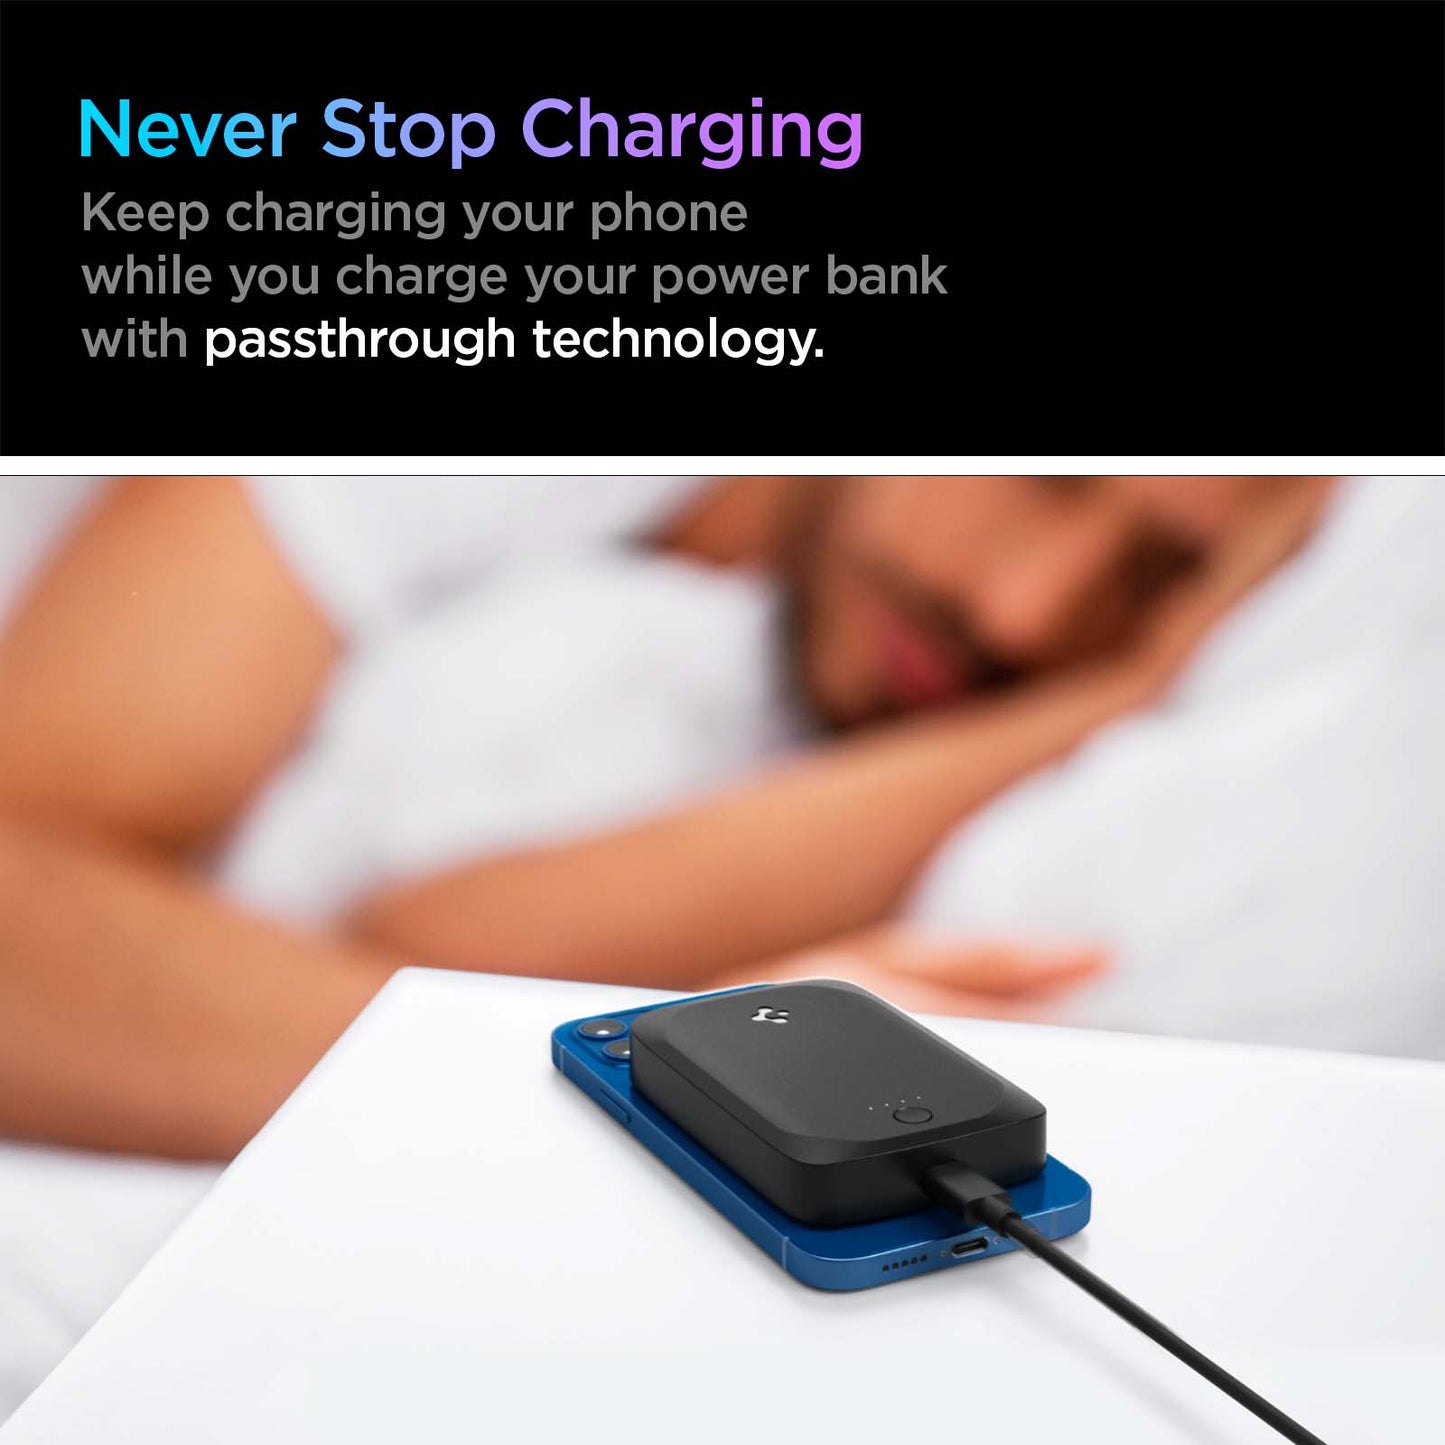 ABA04241 - ArcHybrid 7.5W Portable Wireless Charger PH2100 (MagFit) in Black showing the Never Stop Charging. Keep charging your phone while you charge your power bank with the passthrough technology. A device charged to a charger attached on its back